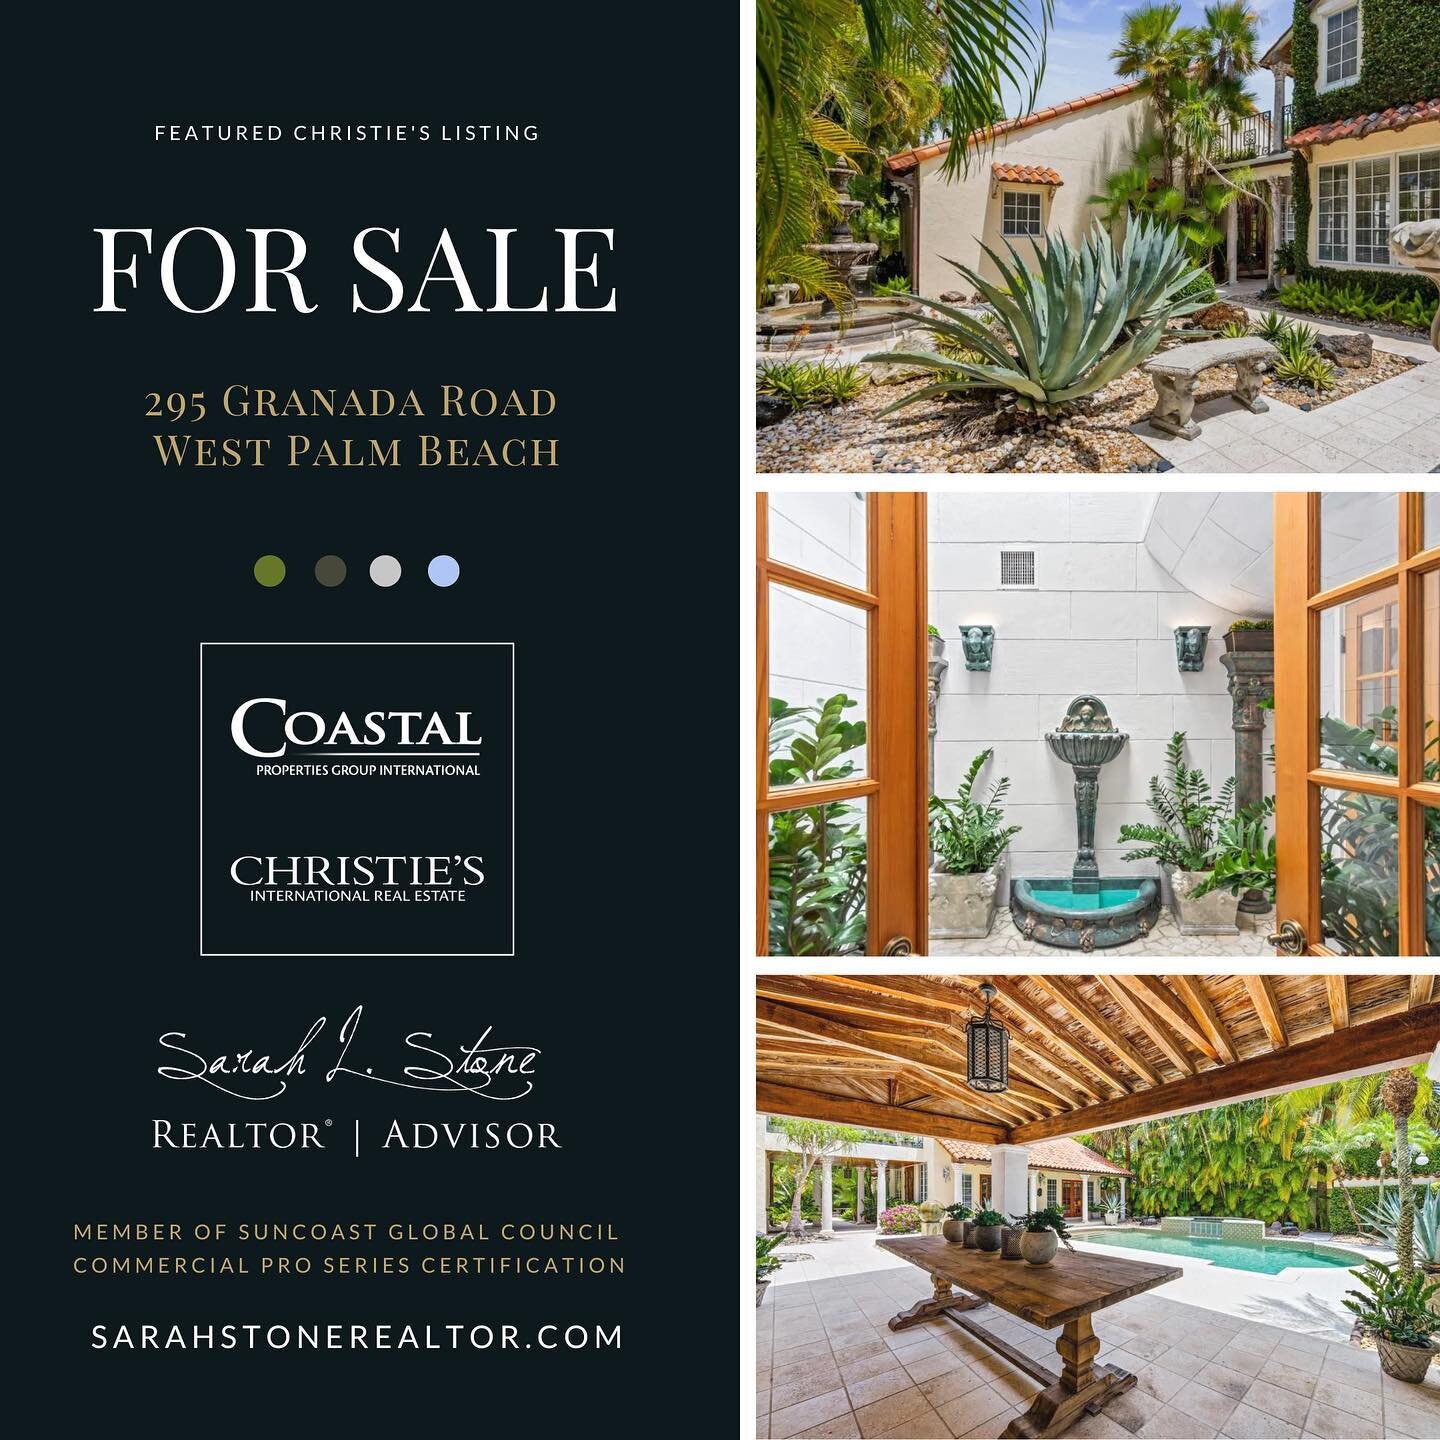 West Palm Beach | Christie&rsquo;s International Real Estate - an exceptional property, Mediterranean revival. Over 5000 ft.&sup2;. With complete privacy, an entertainment courtyard, and a pool + spa. Looking to switch coastlines? We have options! #E